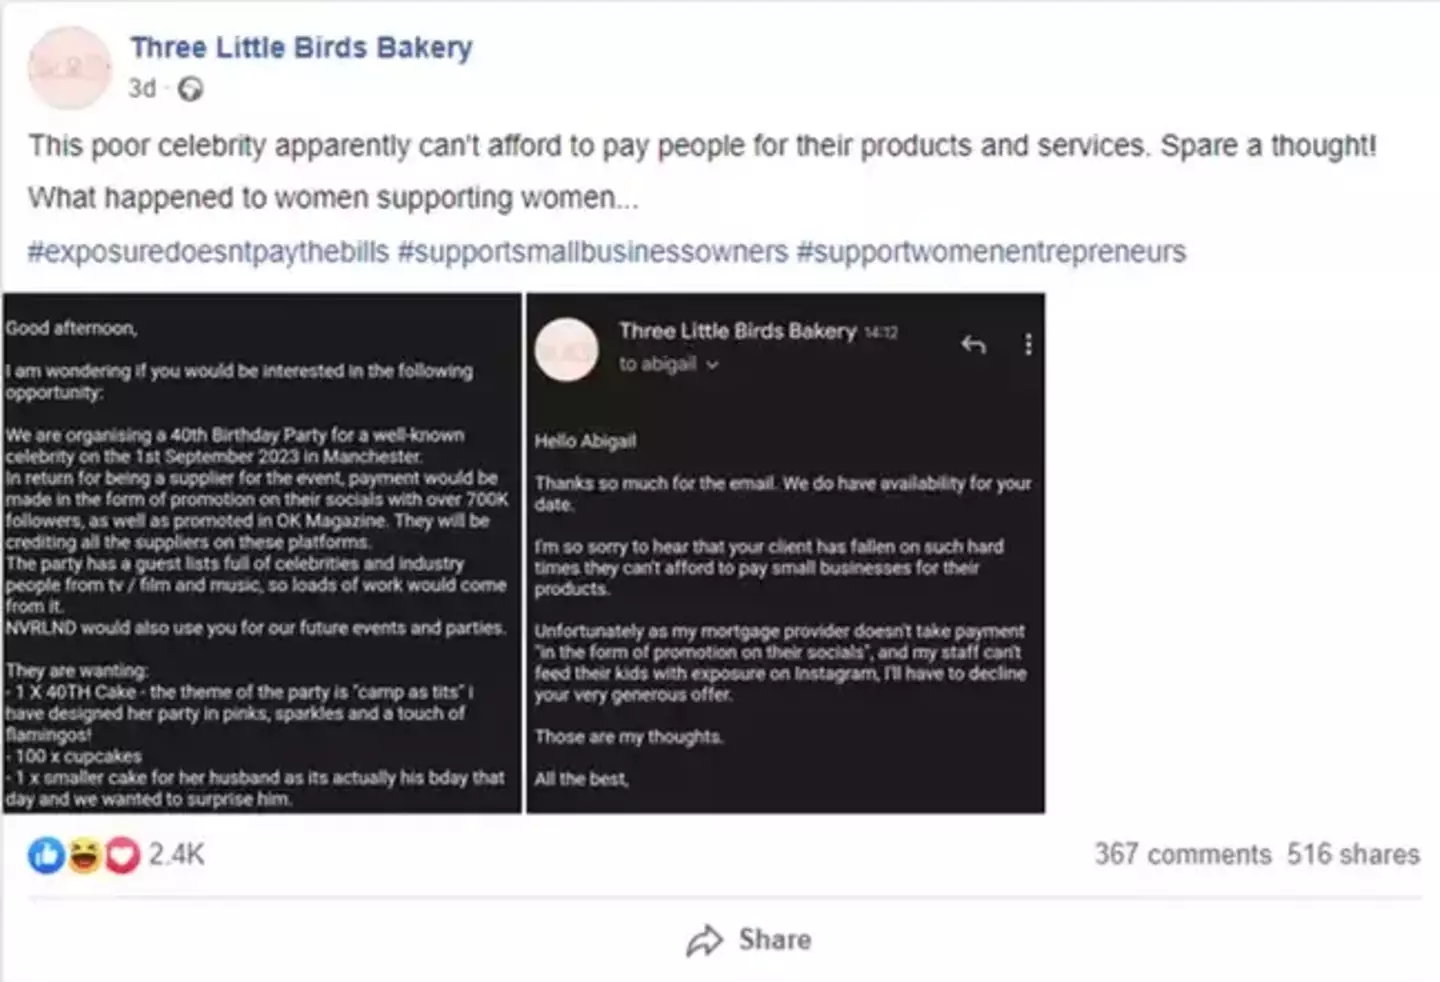 The Bradford bakery called out the company.